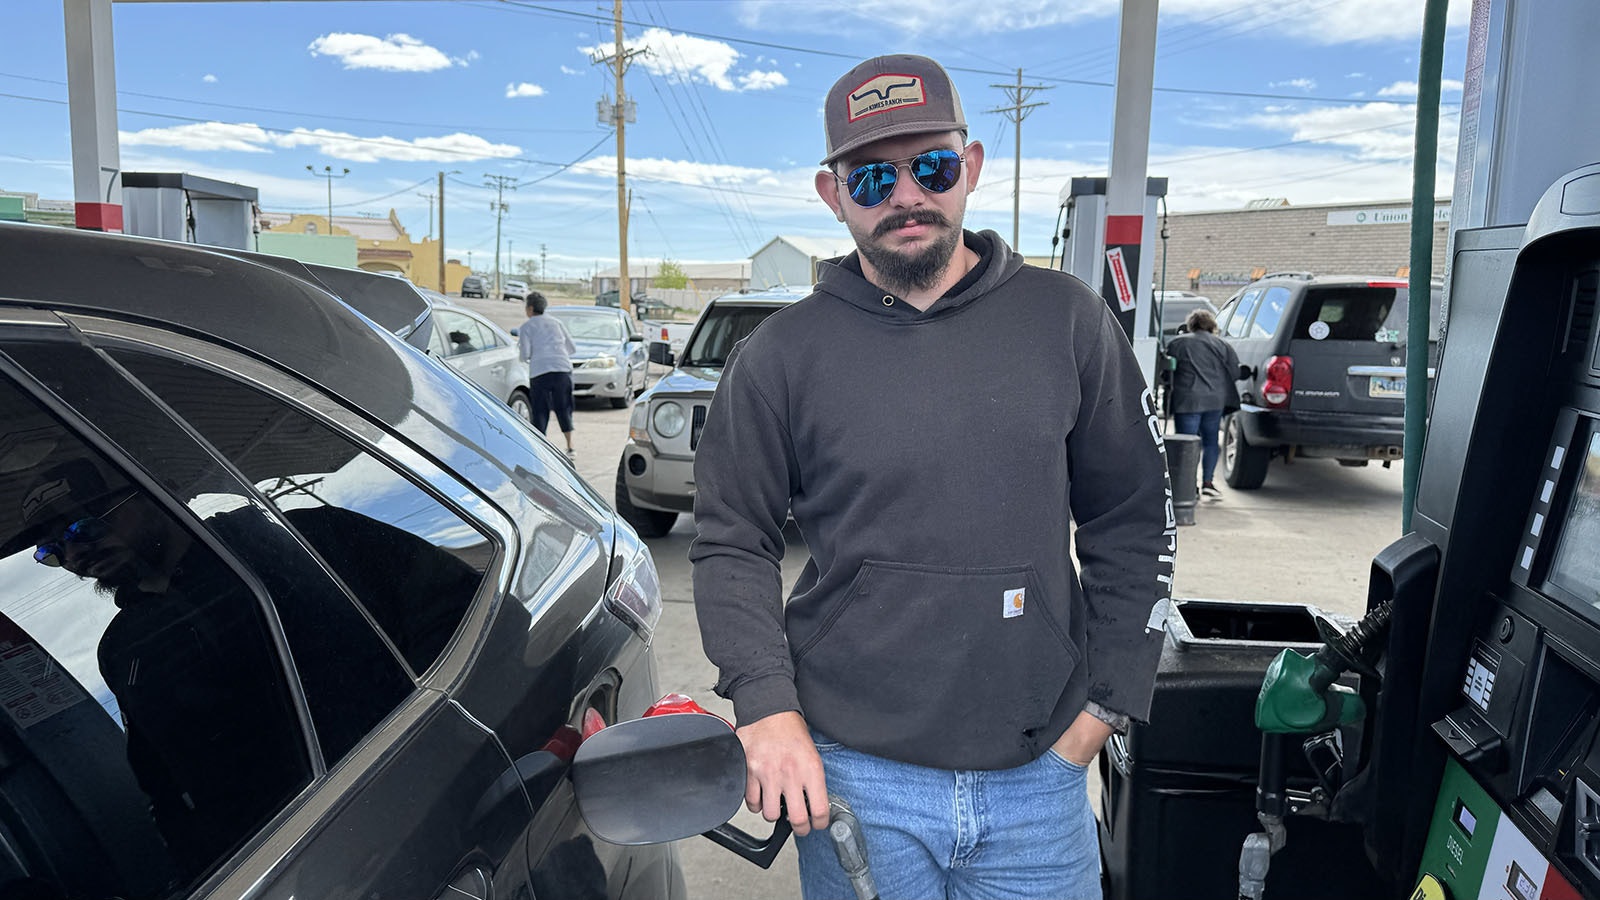 Caleb Williams stopped by to fill up with the discounted gas being sold at $2.38 a gallon at the Hi Market along Lincolnway Boulevard on Sunday. “It’s a good price, the $2.38. I wish it could stay that way, with diesel prices coming down as well,” Williams said. “Biden needs to get out of office, and put (former U.S. President Donald) Trump back in there. Heck, yeah.”